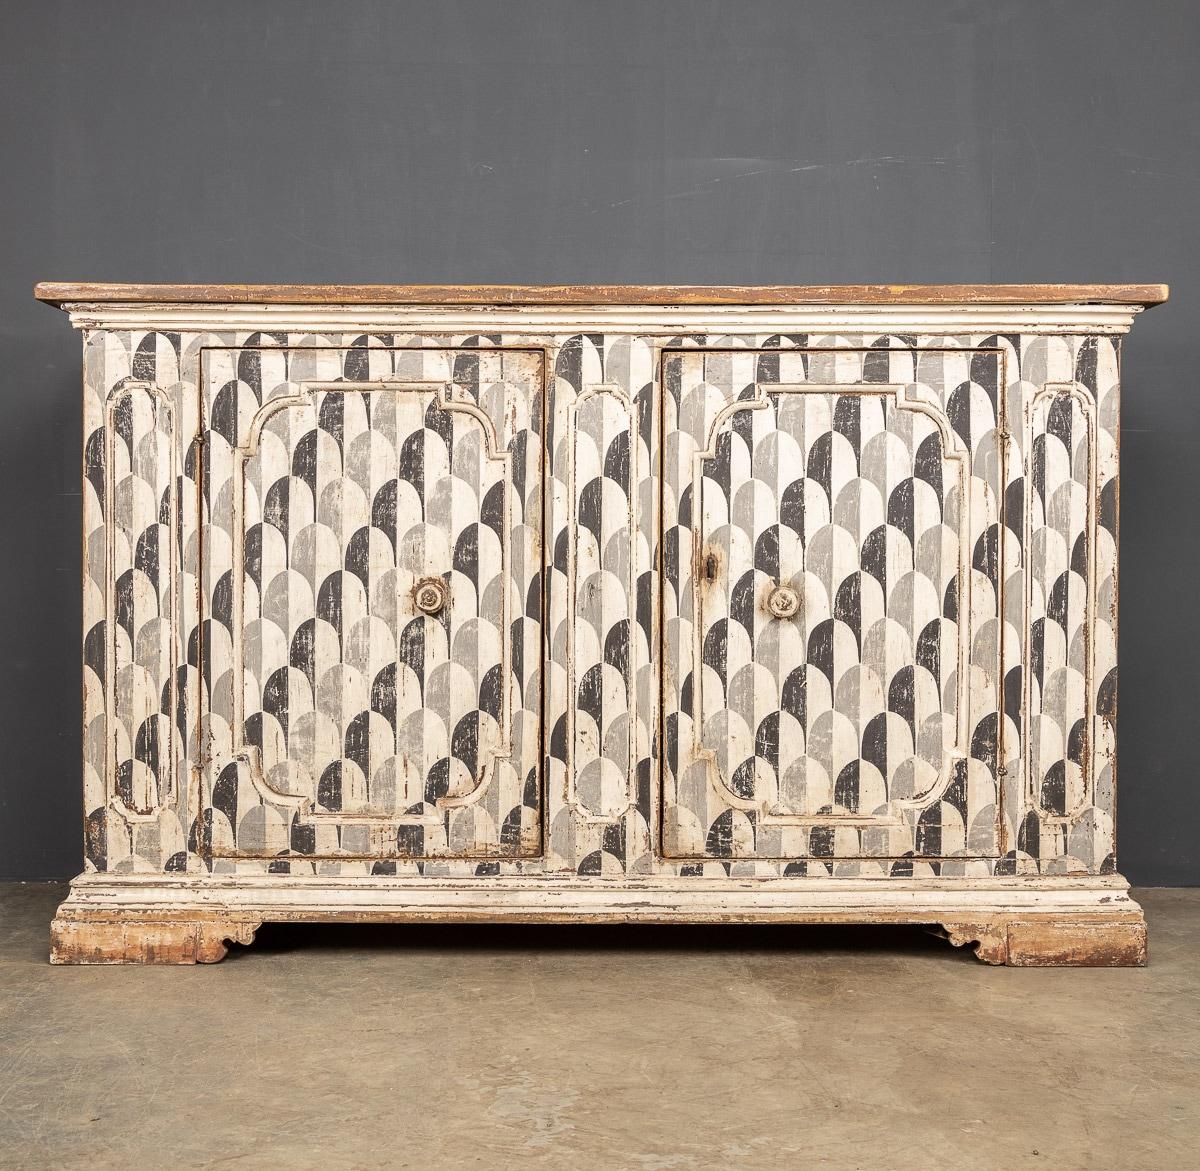 Antique mid-19th Century Italian pine credenza from a Tuscan farmhouse. This piece has been later painted in a striking geometric design, circa 1850. All original iron locks and key. A wonderful and rustic piece of statement furniture, ideal for